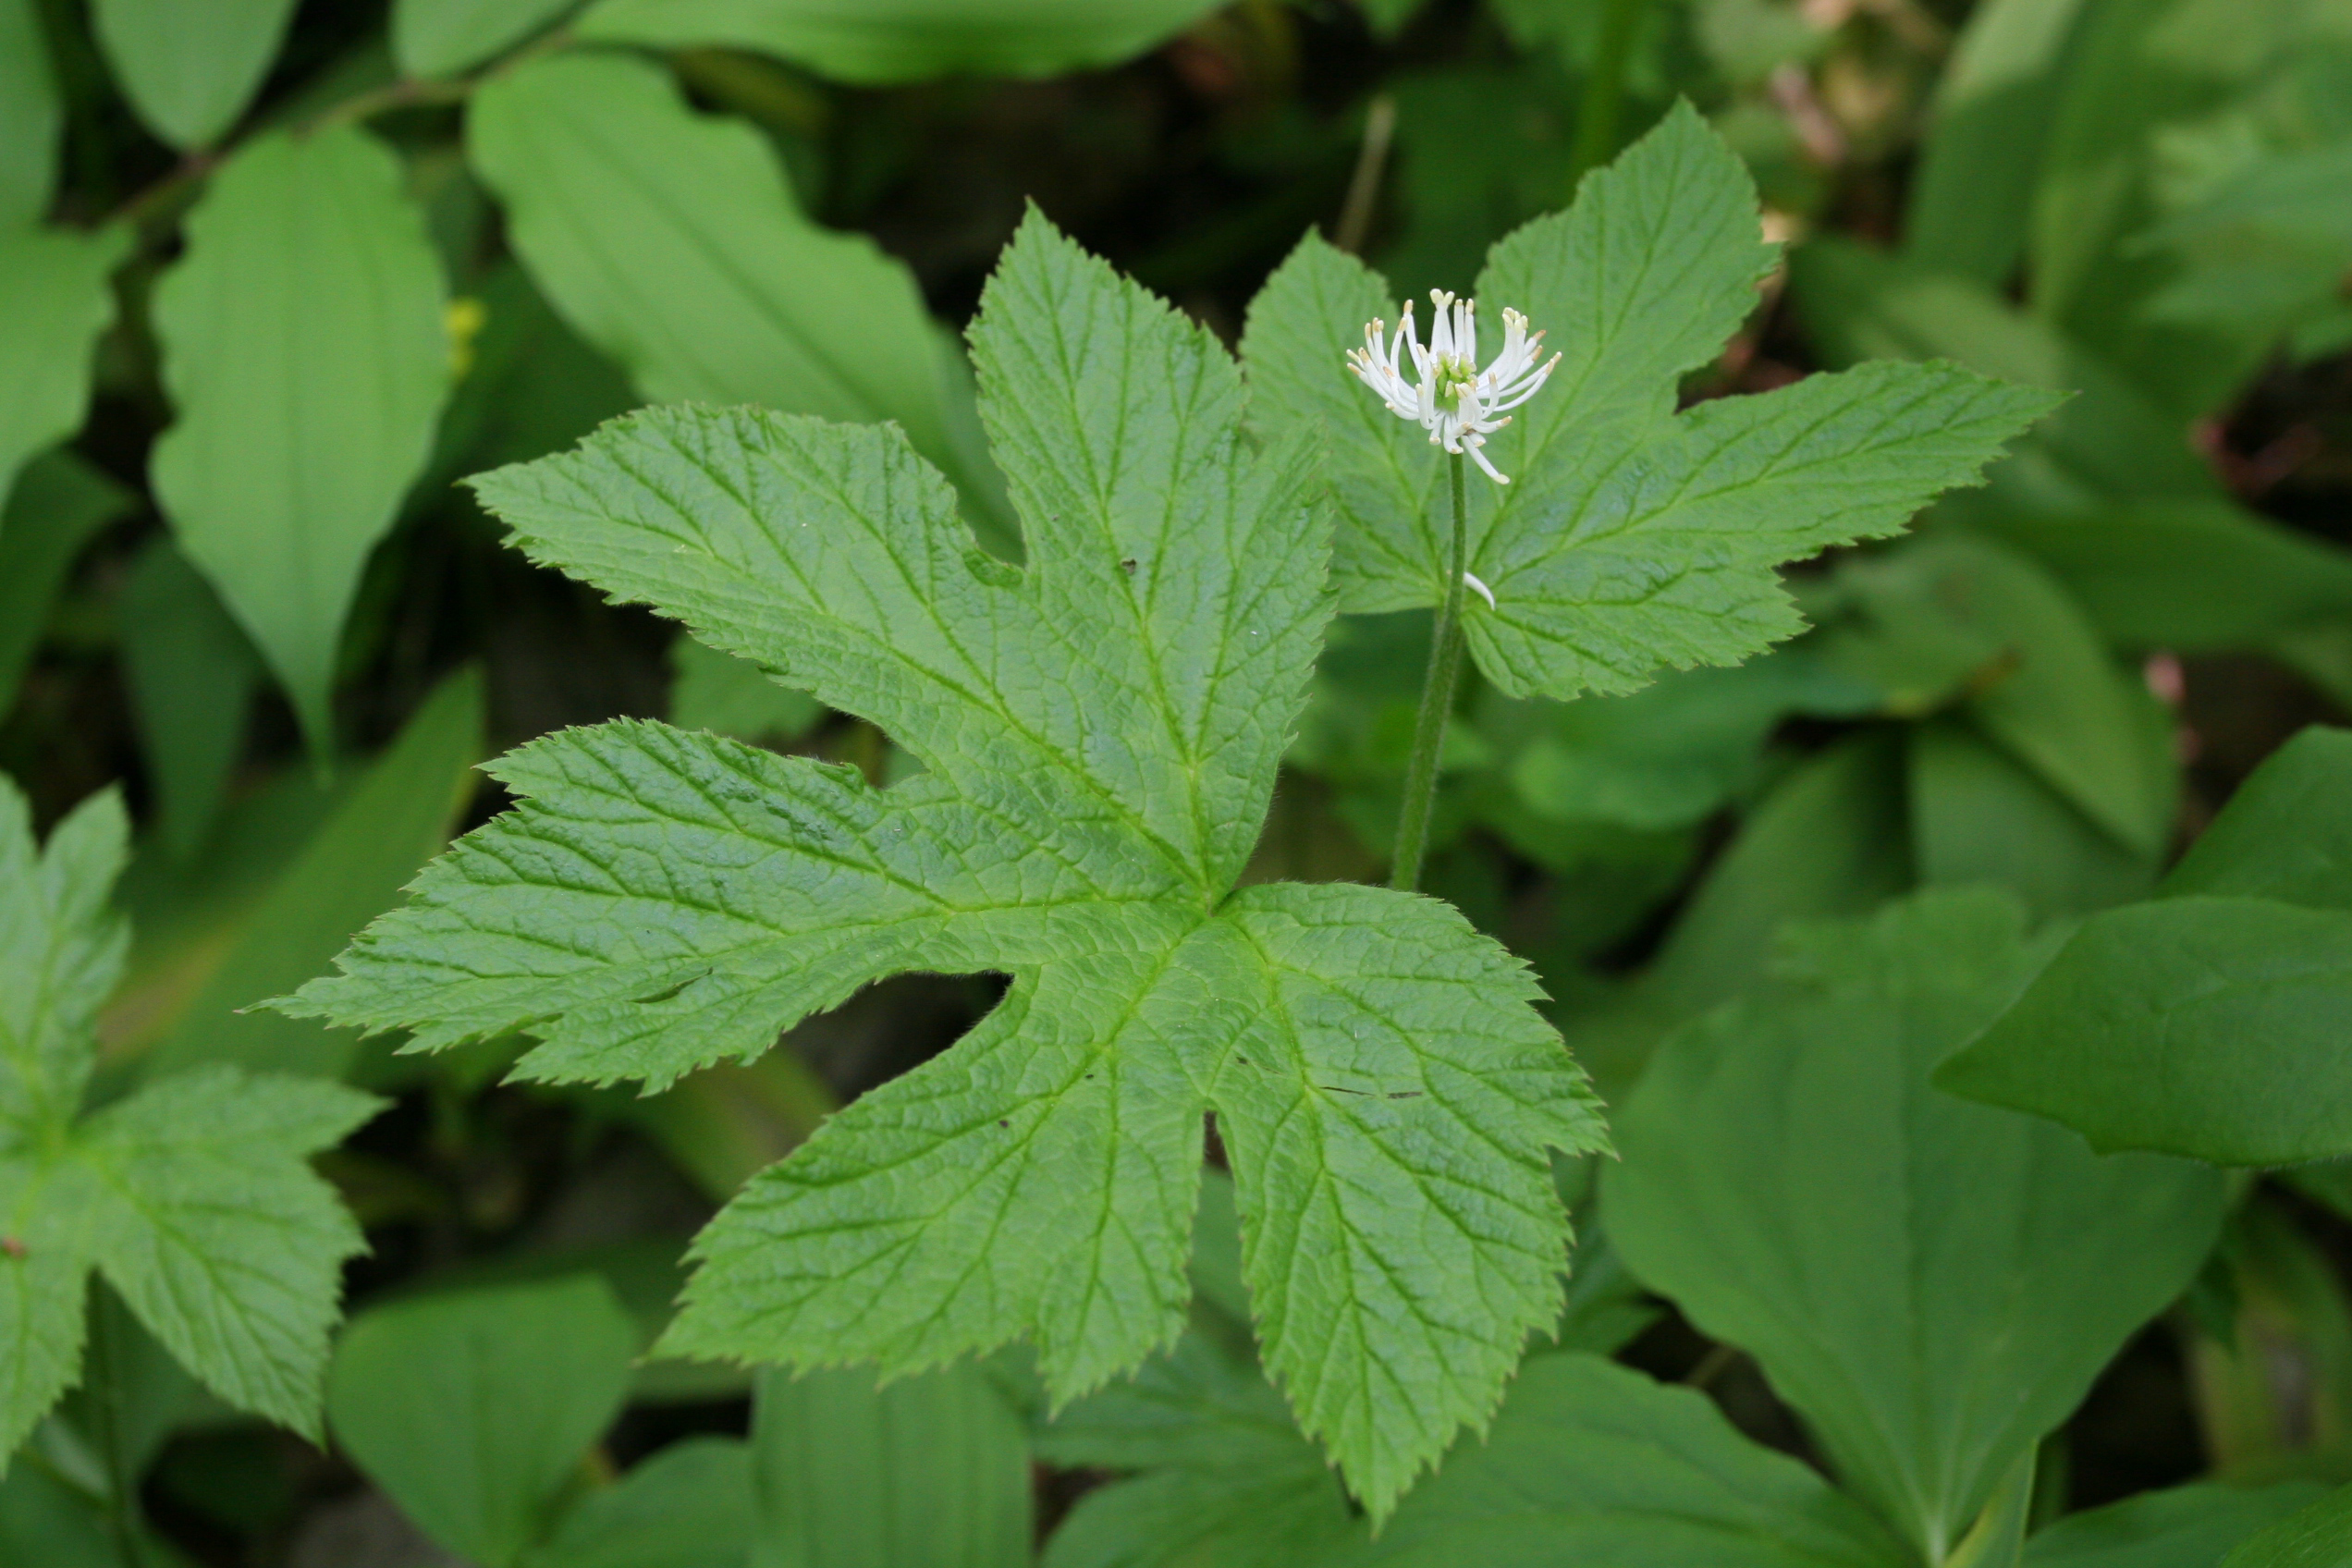 Photograph of a Goldenseal plant, showing a white flower with green in the middle, on a slightly hairy stem, with a large green leaf.